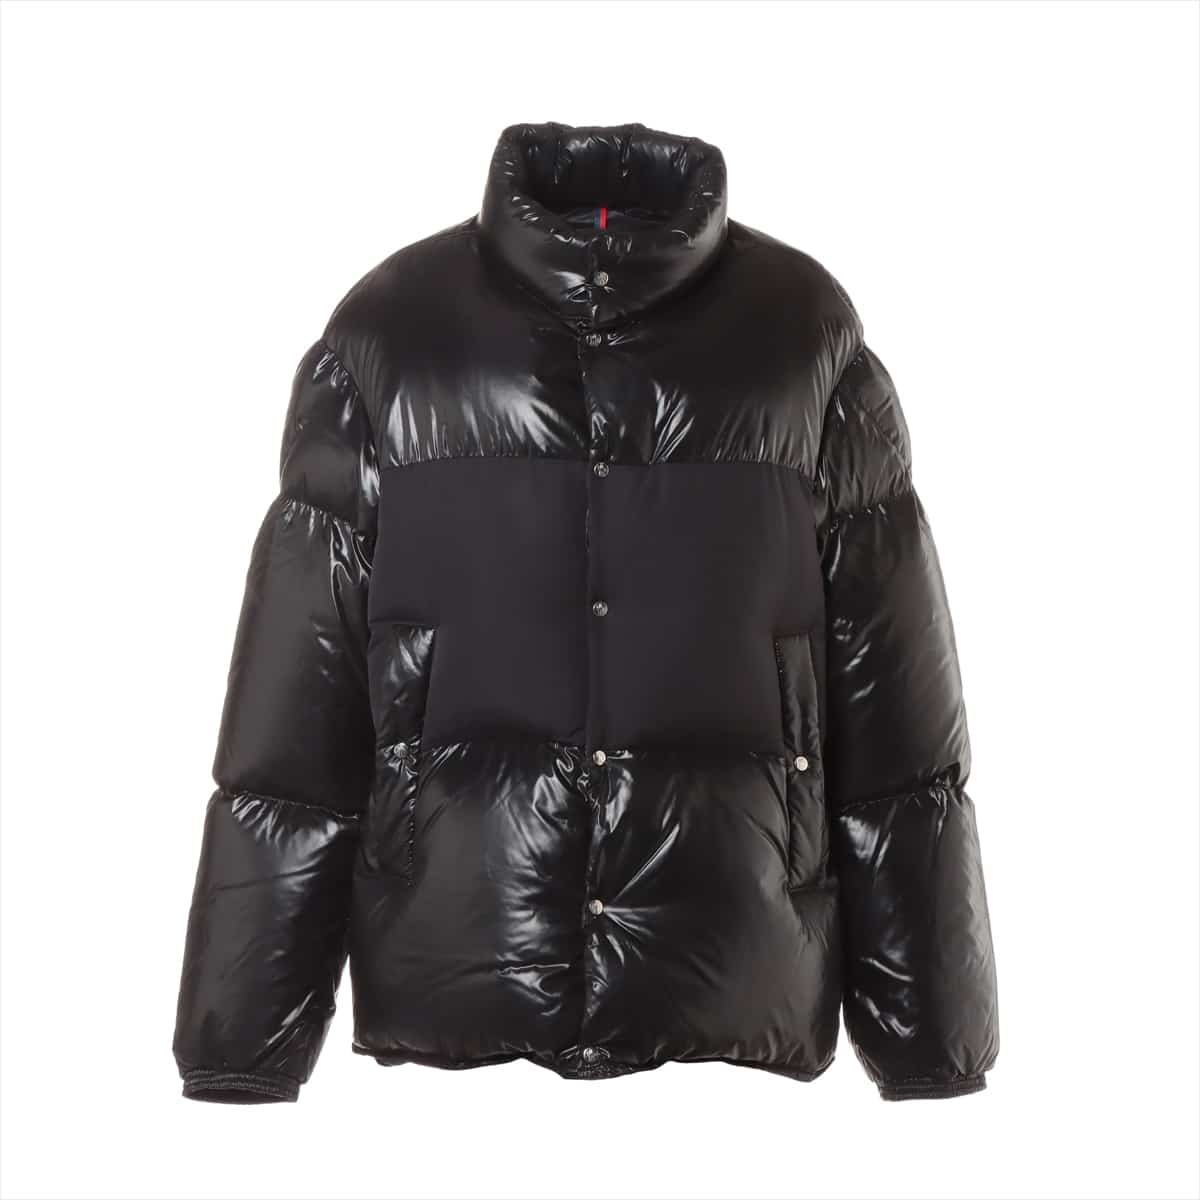 Moncler AYNARD 17 years Nylon Down jacket 4 Black  There is a big thread around the back